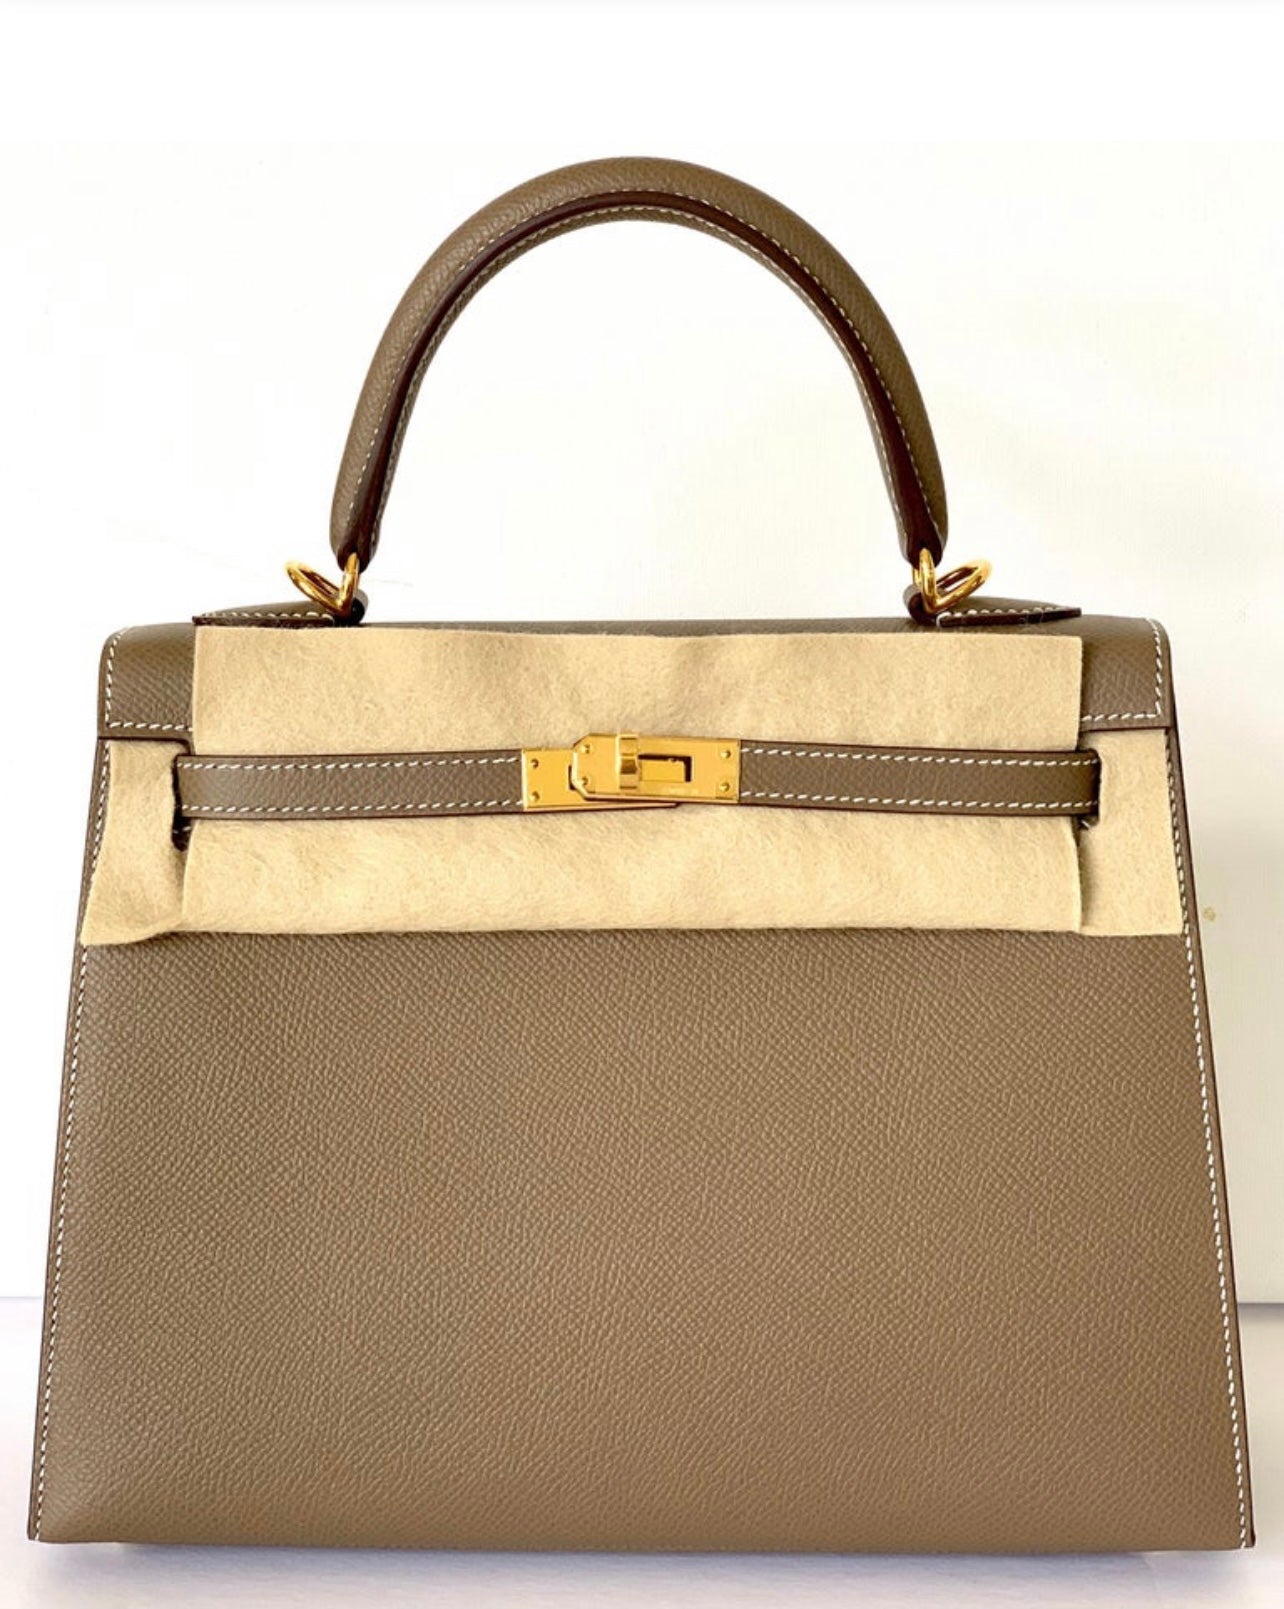 Hermes Kelly Bag Epsom Leather Gold Hardware In Yellow